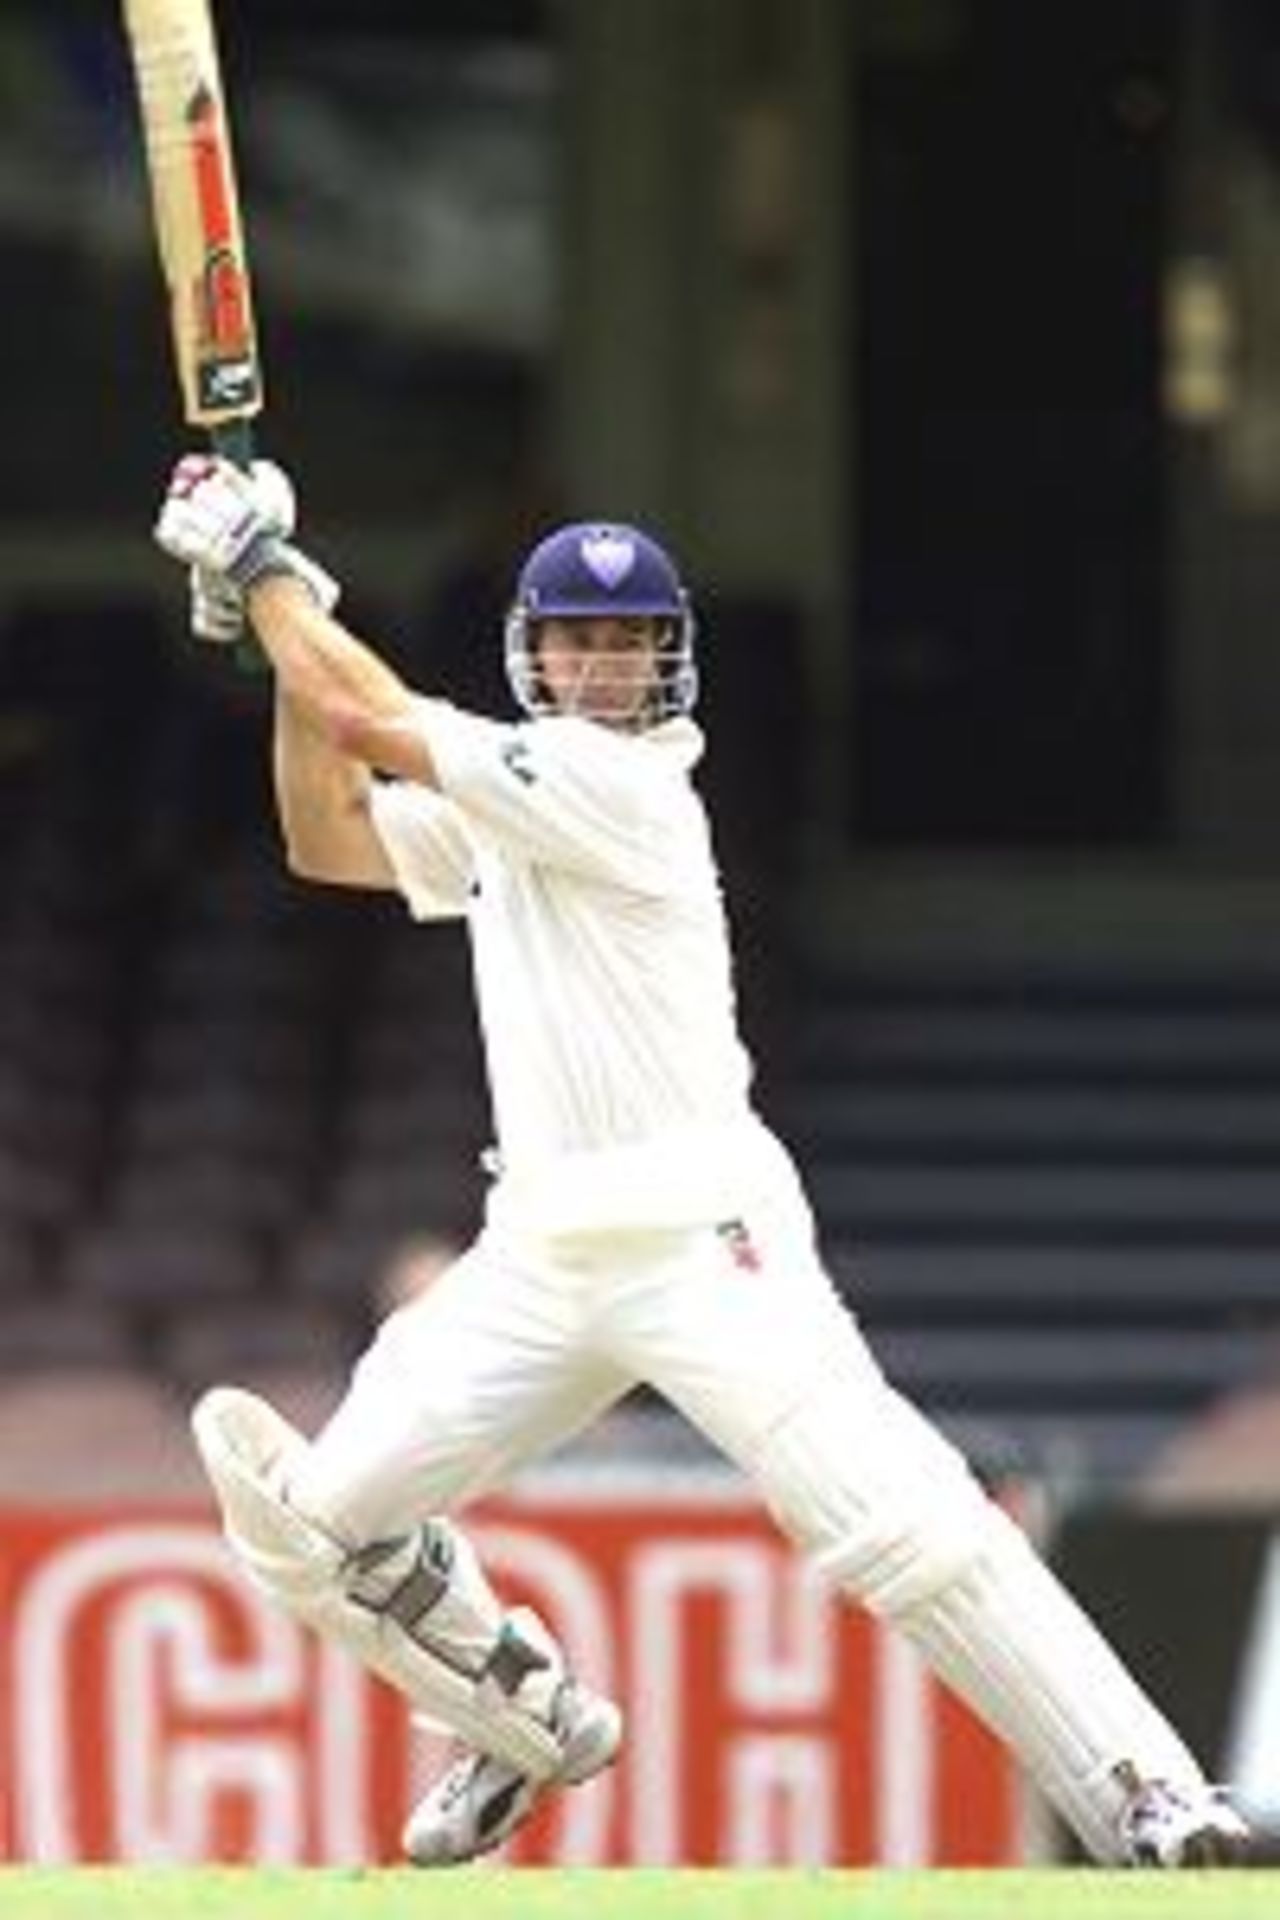 22 Dec 2001: Michael Bevan of New South Wales in action during his innings of 183 not out during the third day's play in the tour match between South Africa and New South Wales being played at the Sydney Cricket Ground, Sydney, Australia.